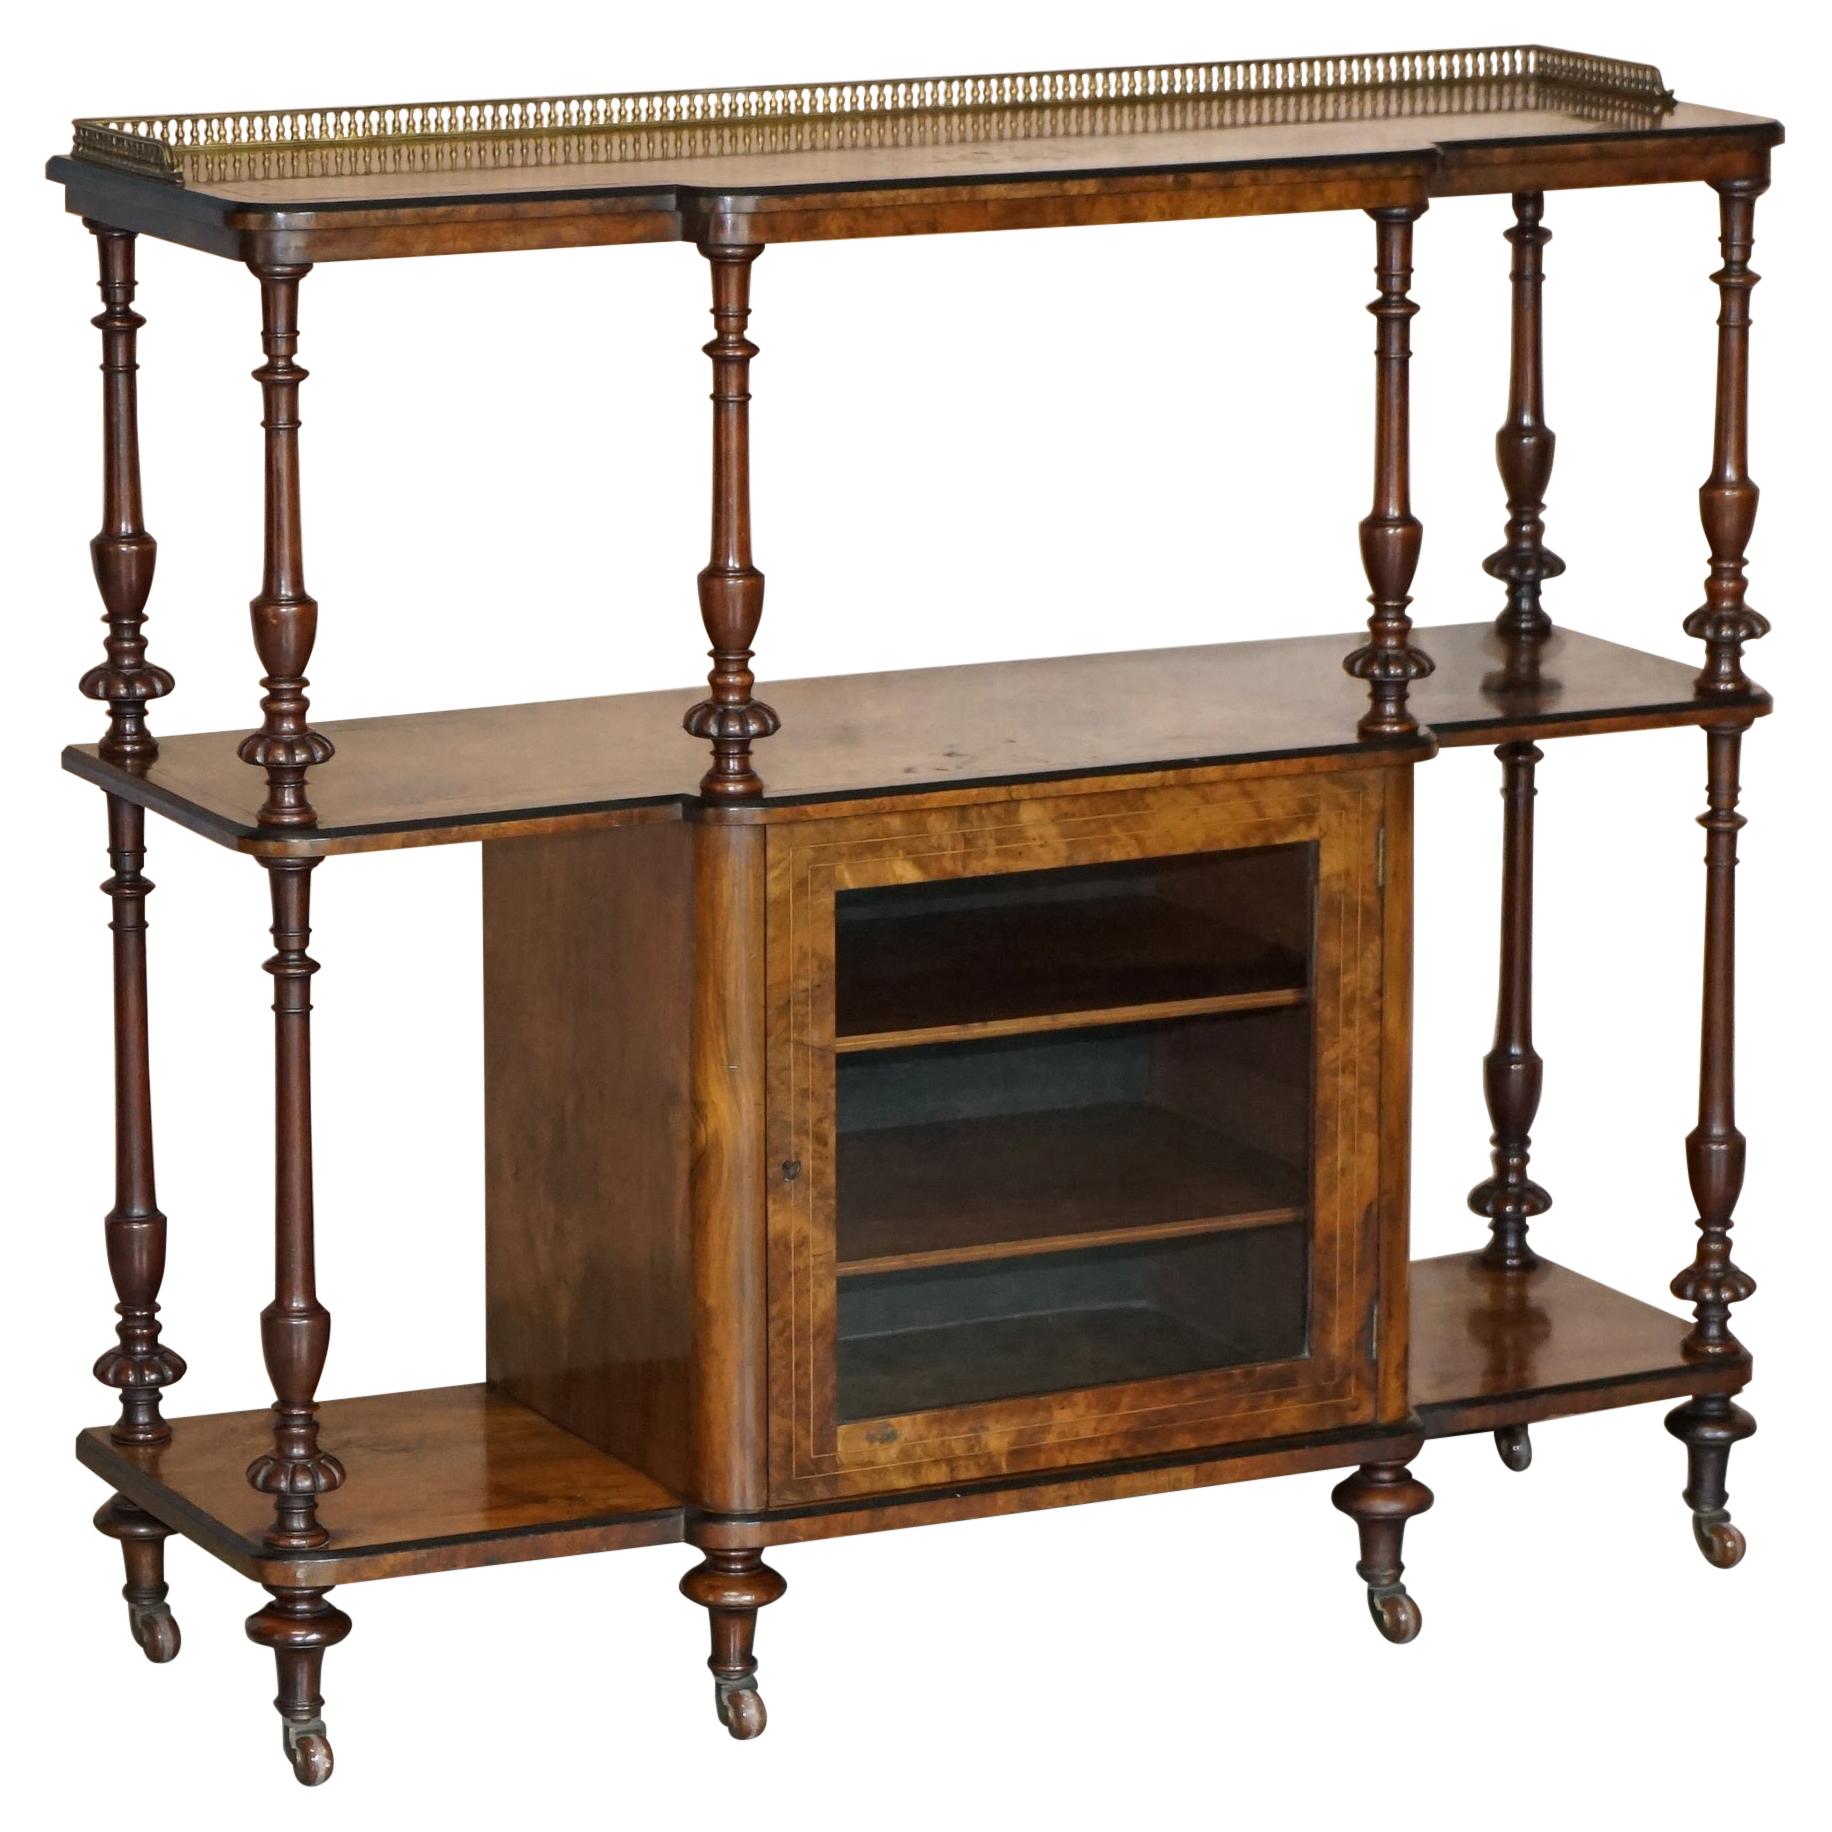 Fine Burr Walnut with Brass Gallery Rail Open Library Bookcase Etagere Whatnot